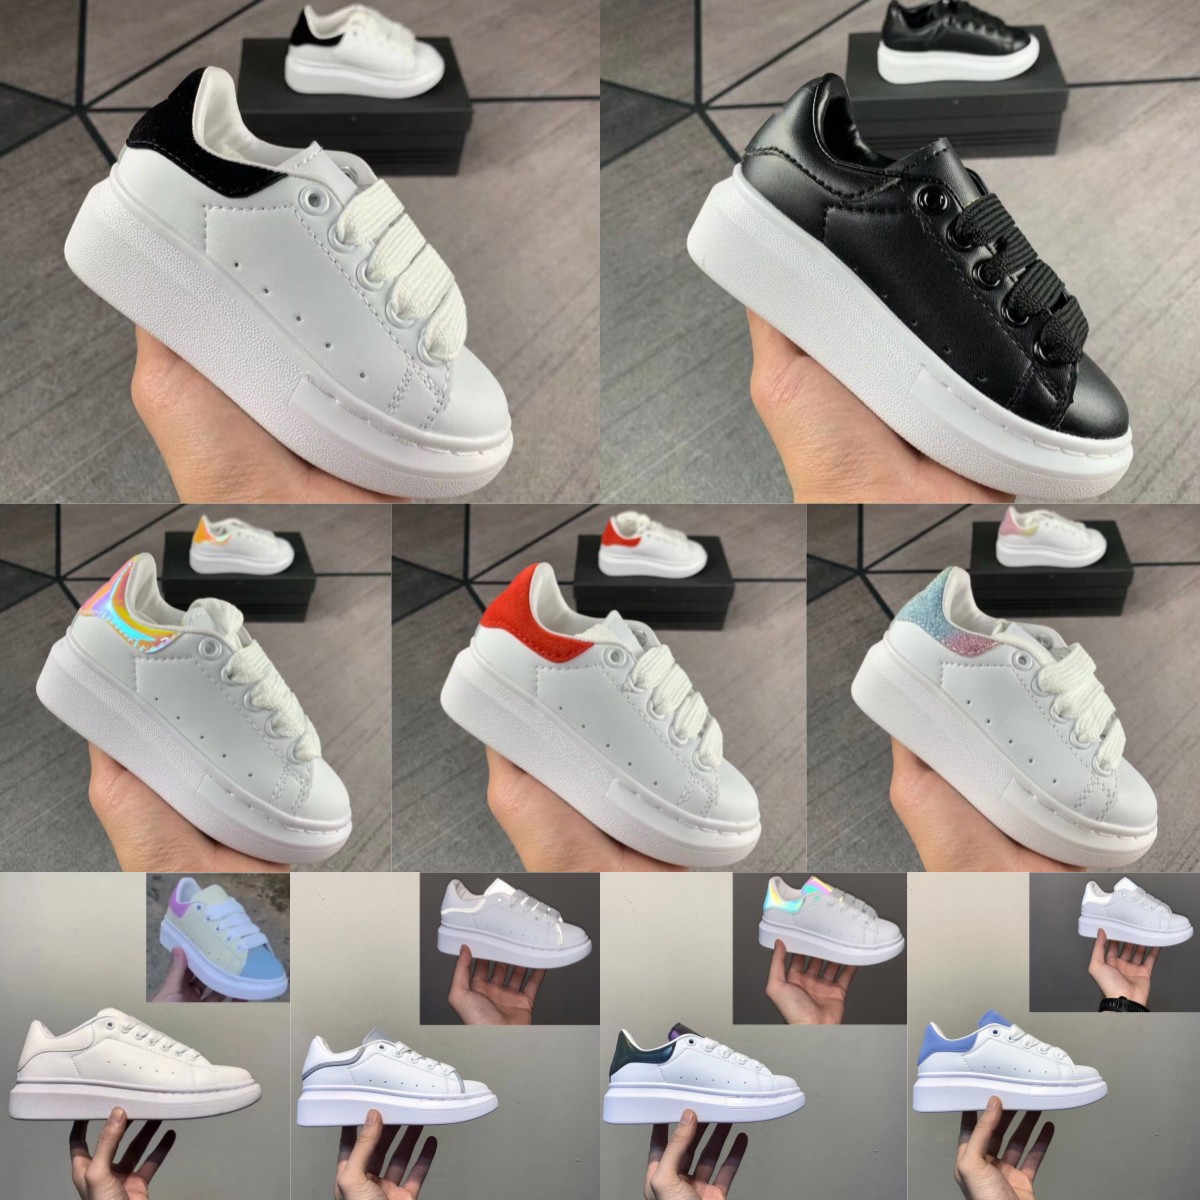 

Kids Shoes Boys Girls Leather Sneakers Toddler Black White Children Youth Outdoor Platform Oversized Espadrilles Luxury Flats Casual Trainers Red Blue Shock Pink, Without box